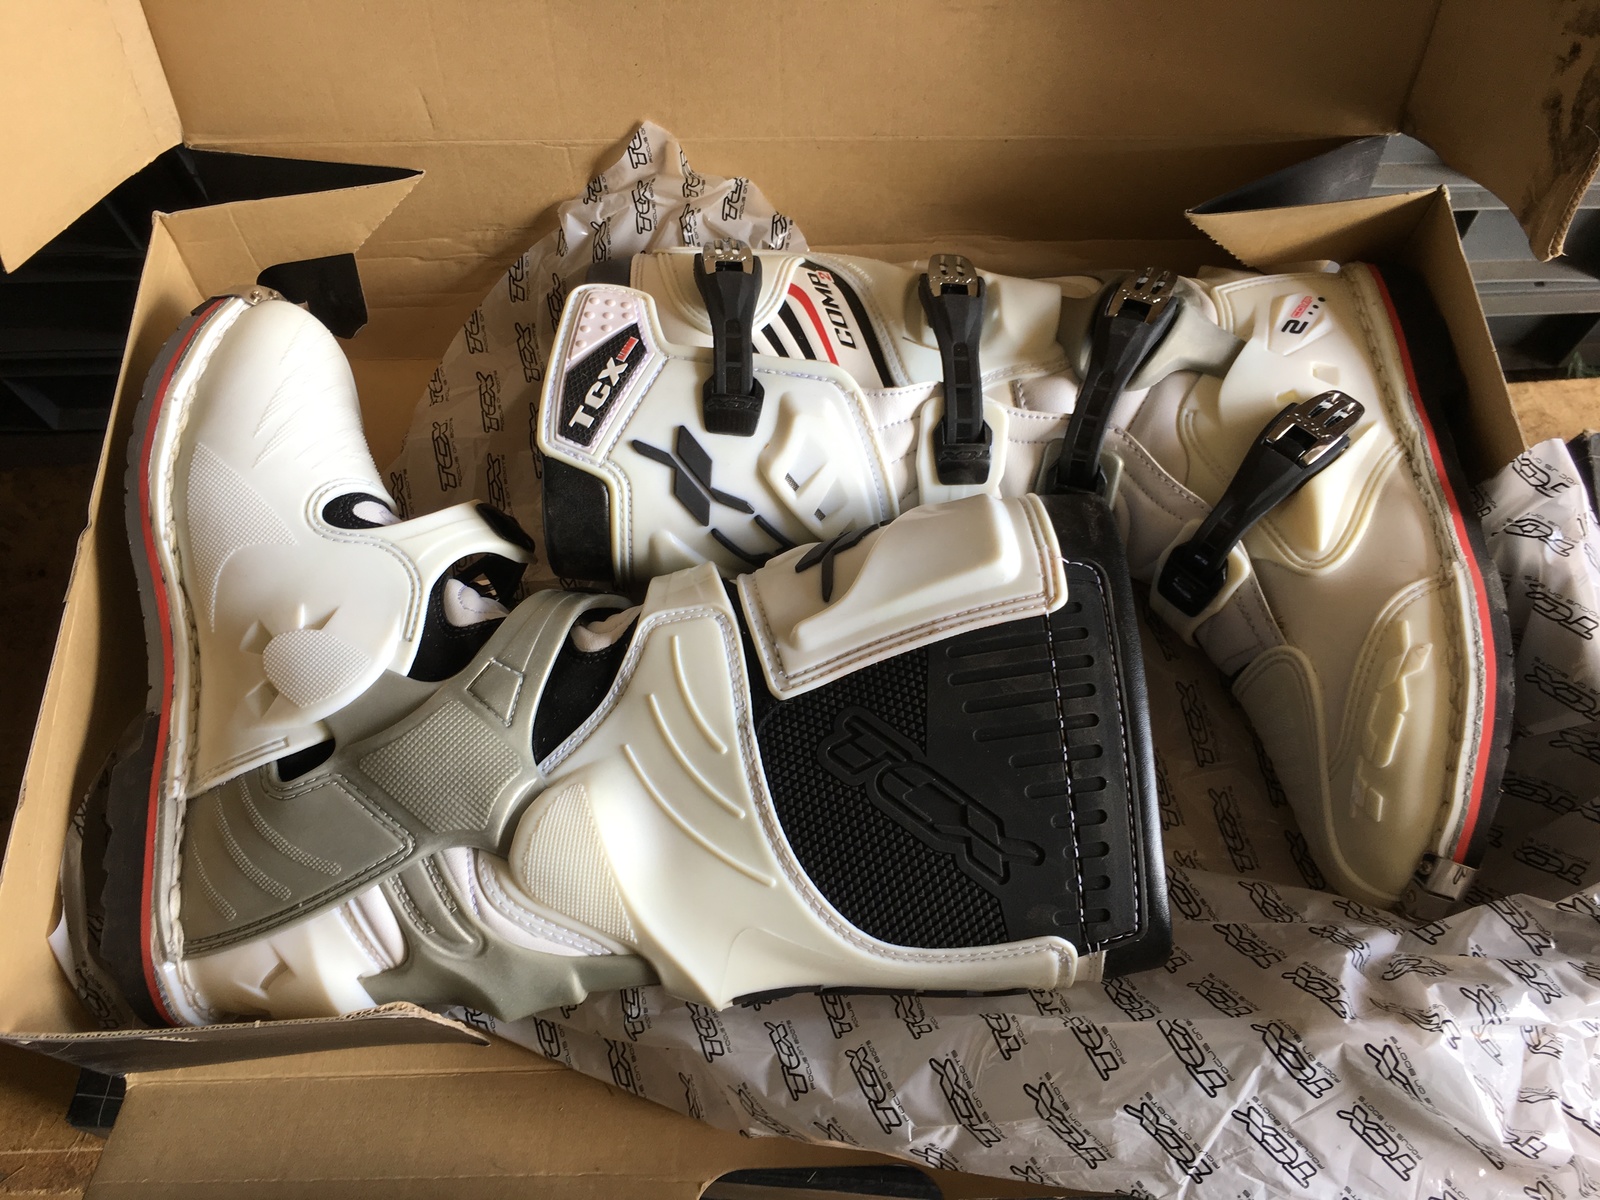 TCX COMP 2 OFF ROAD DIRT BIKE BOOTS WHITE SIZE EURO 43 US 9